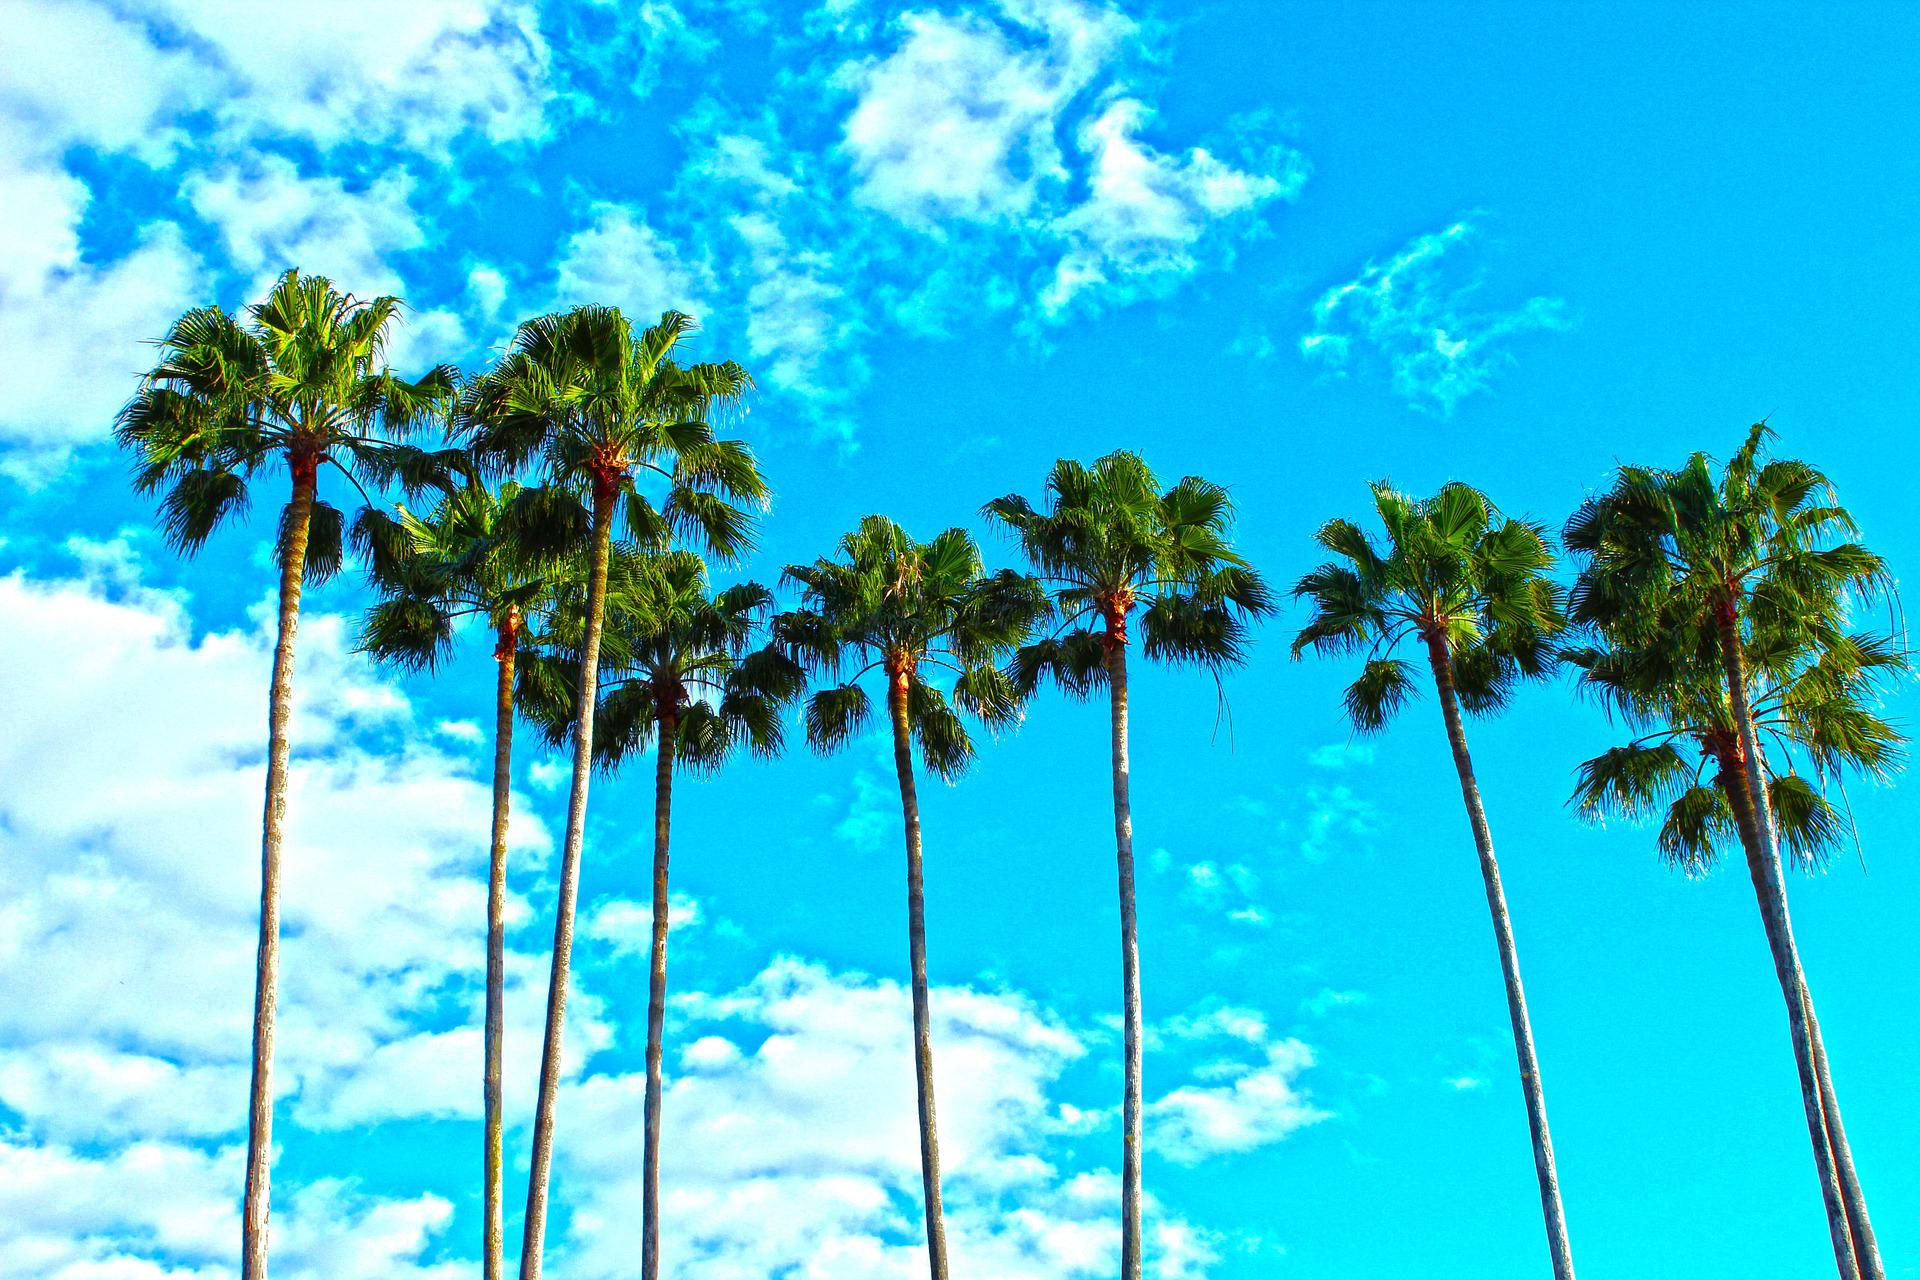 Tall palm trees in Florida against a blue sky with little white clouds